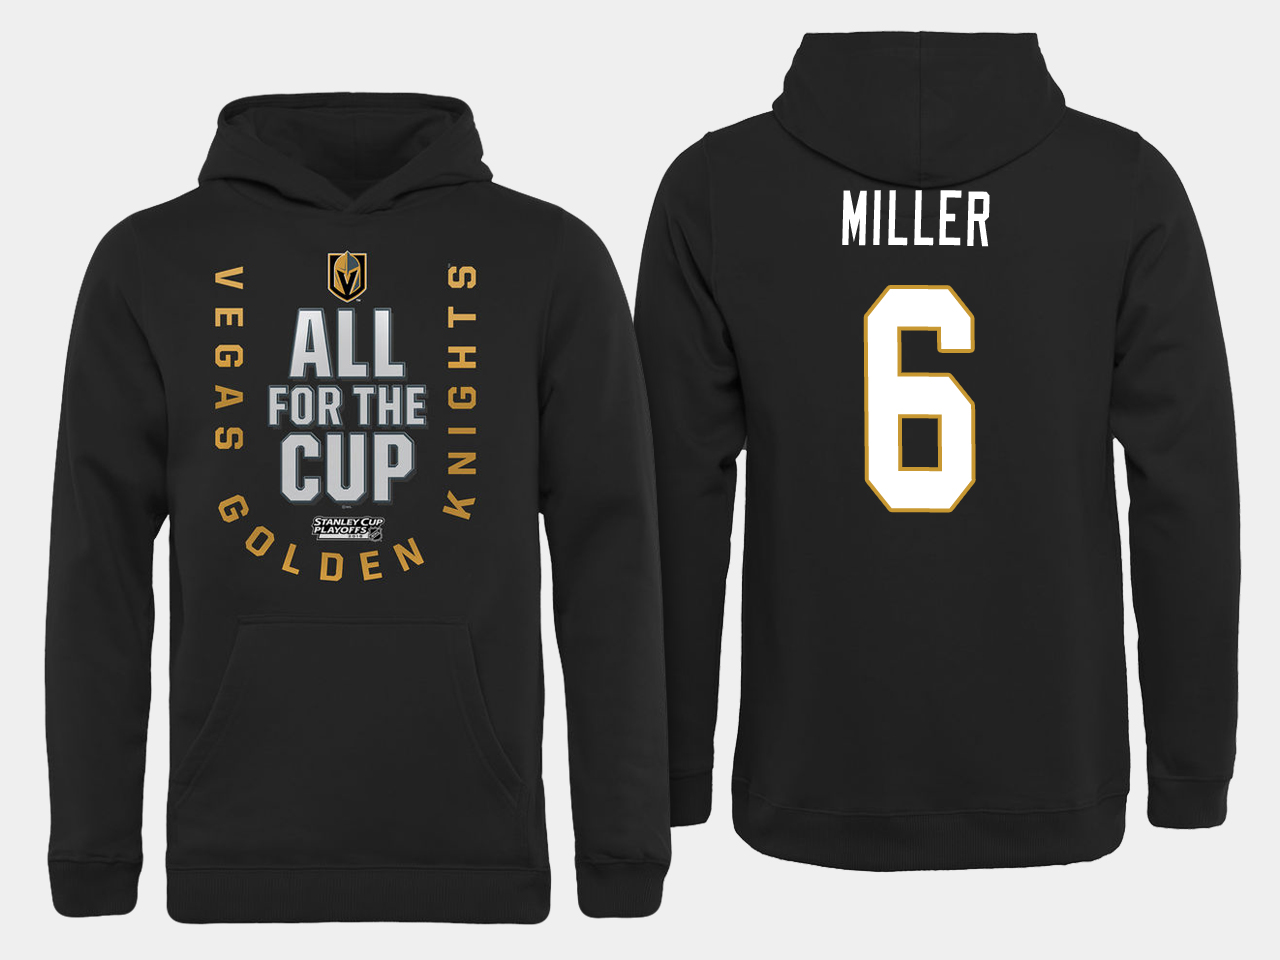 Men NHL Vegas Golden Knights #6 Miller All for the Cup hoodie->more nhl jerseys->NHL Jersey